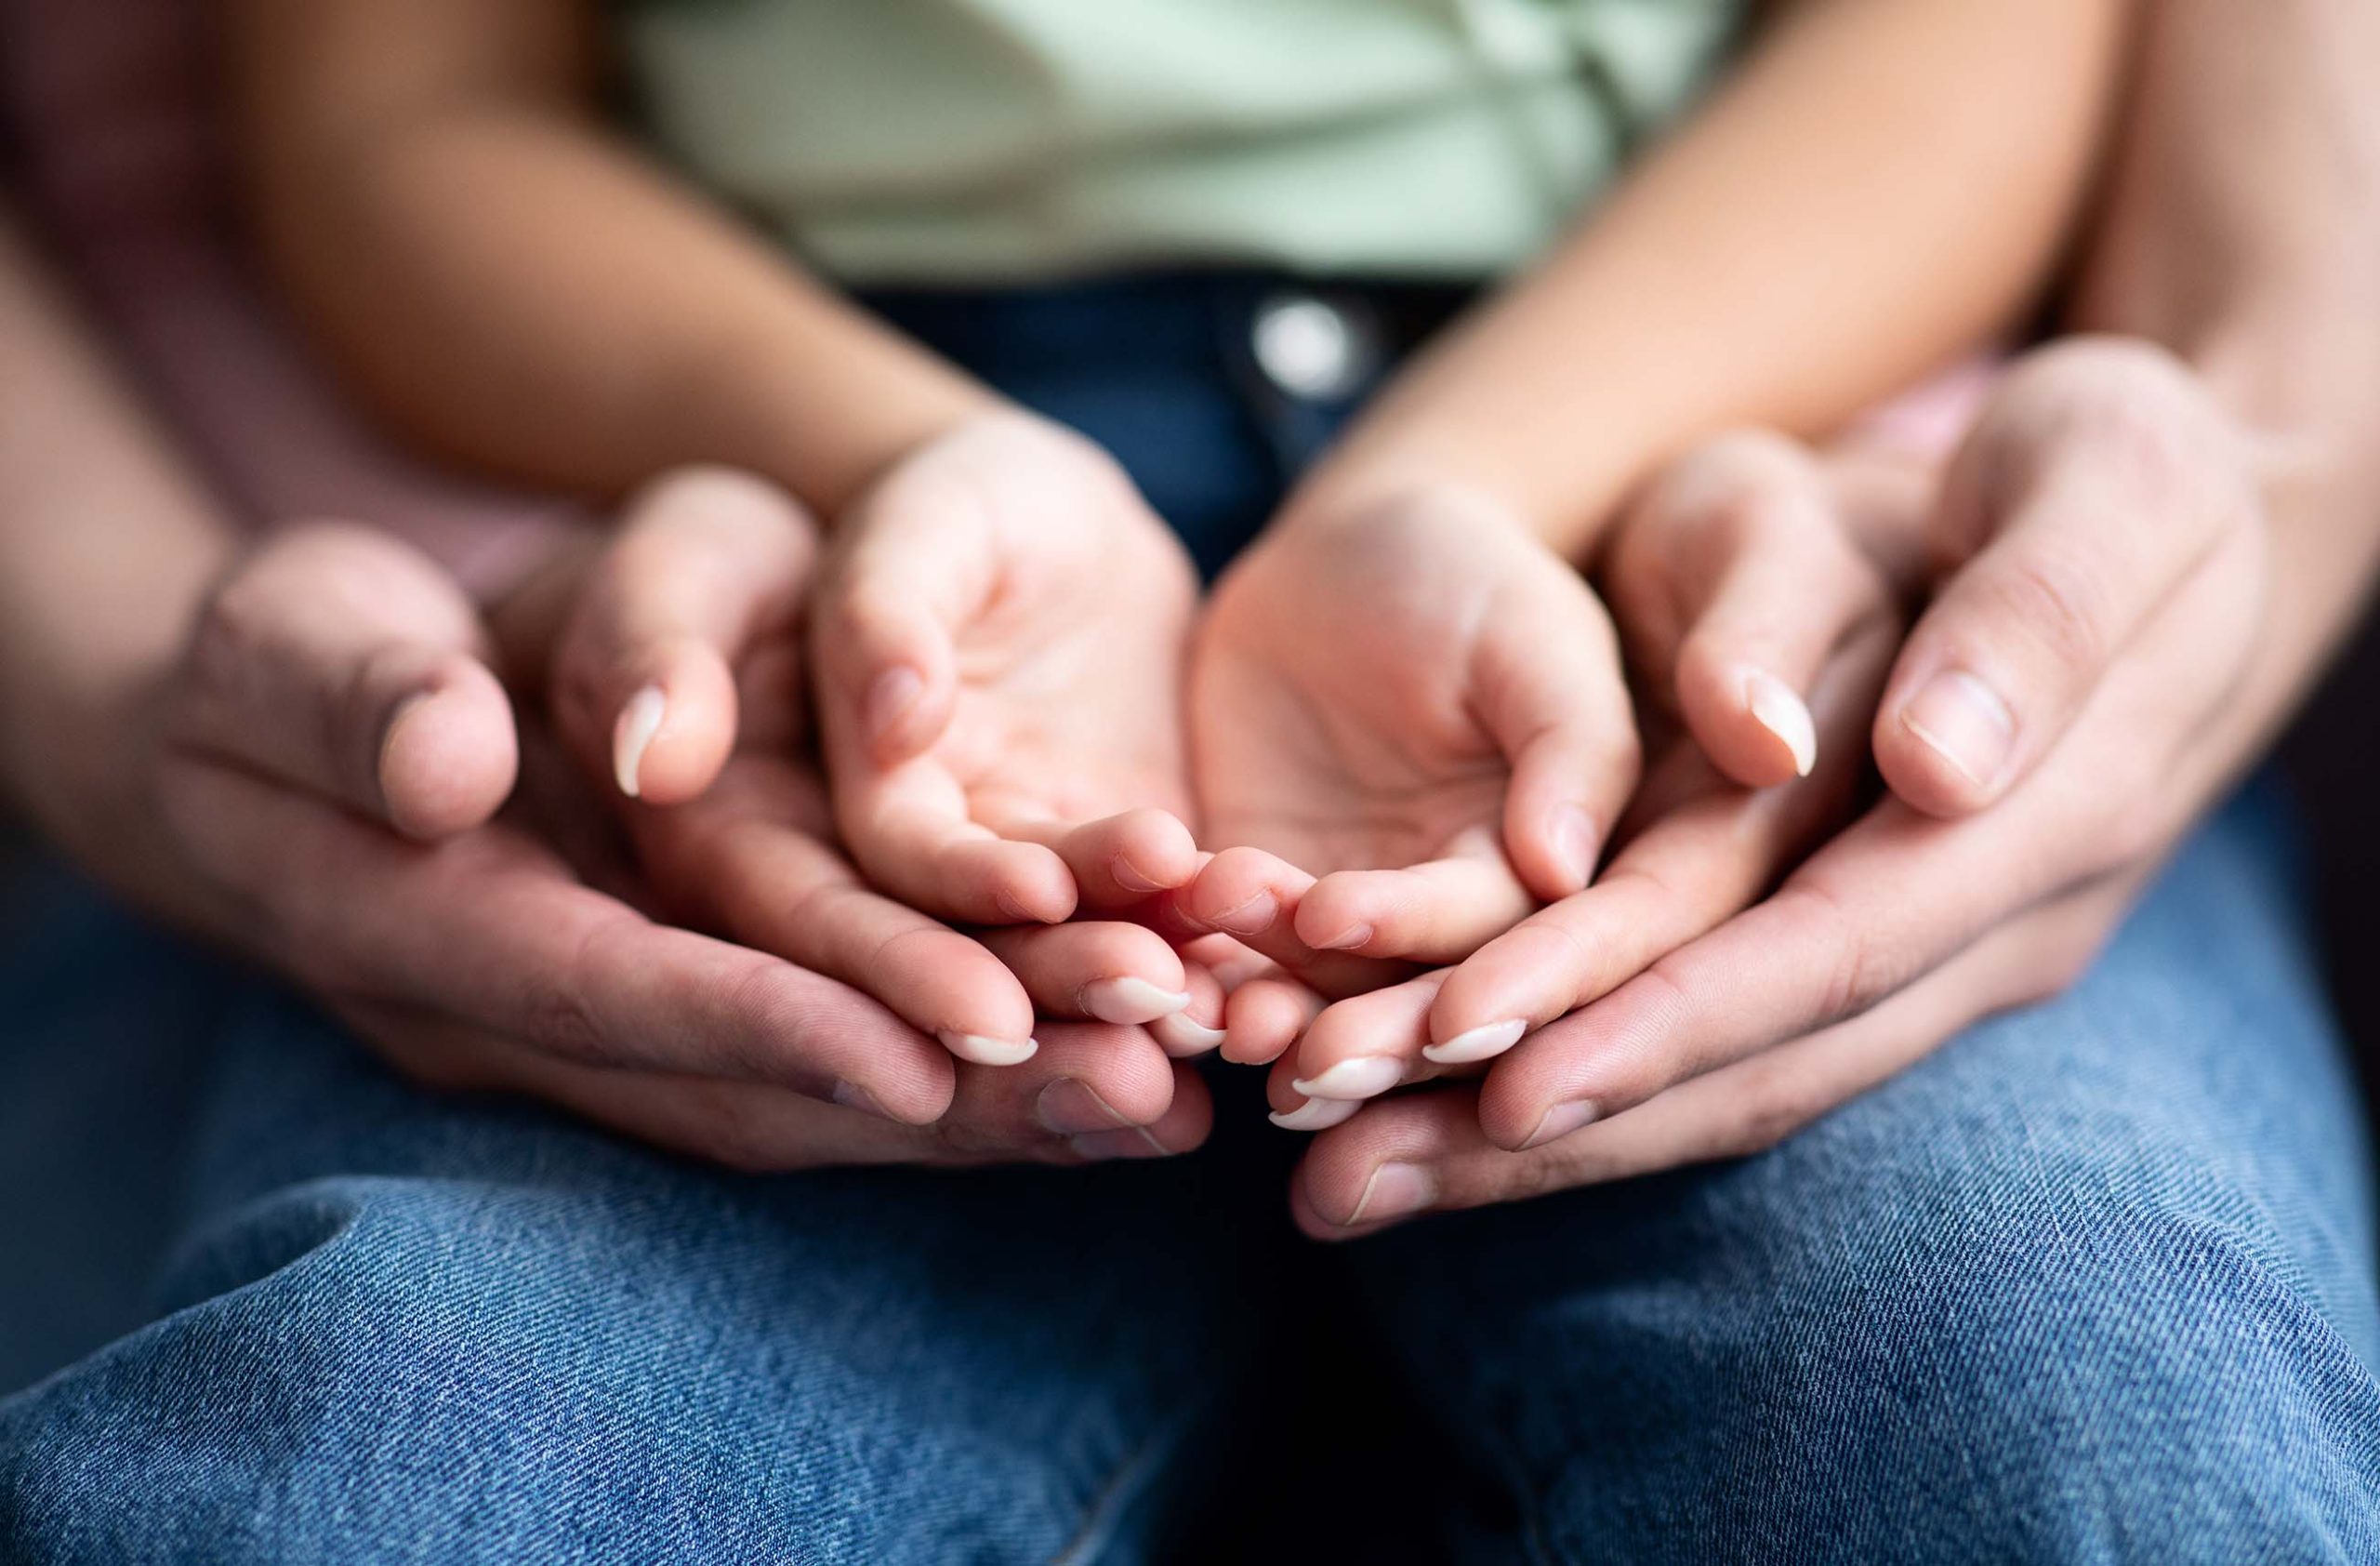 Parents and child placing their hands together, closeup shot. Conceptual image for family support, unity and love, selective focus at three pair of palms